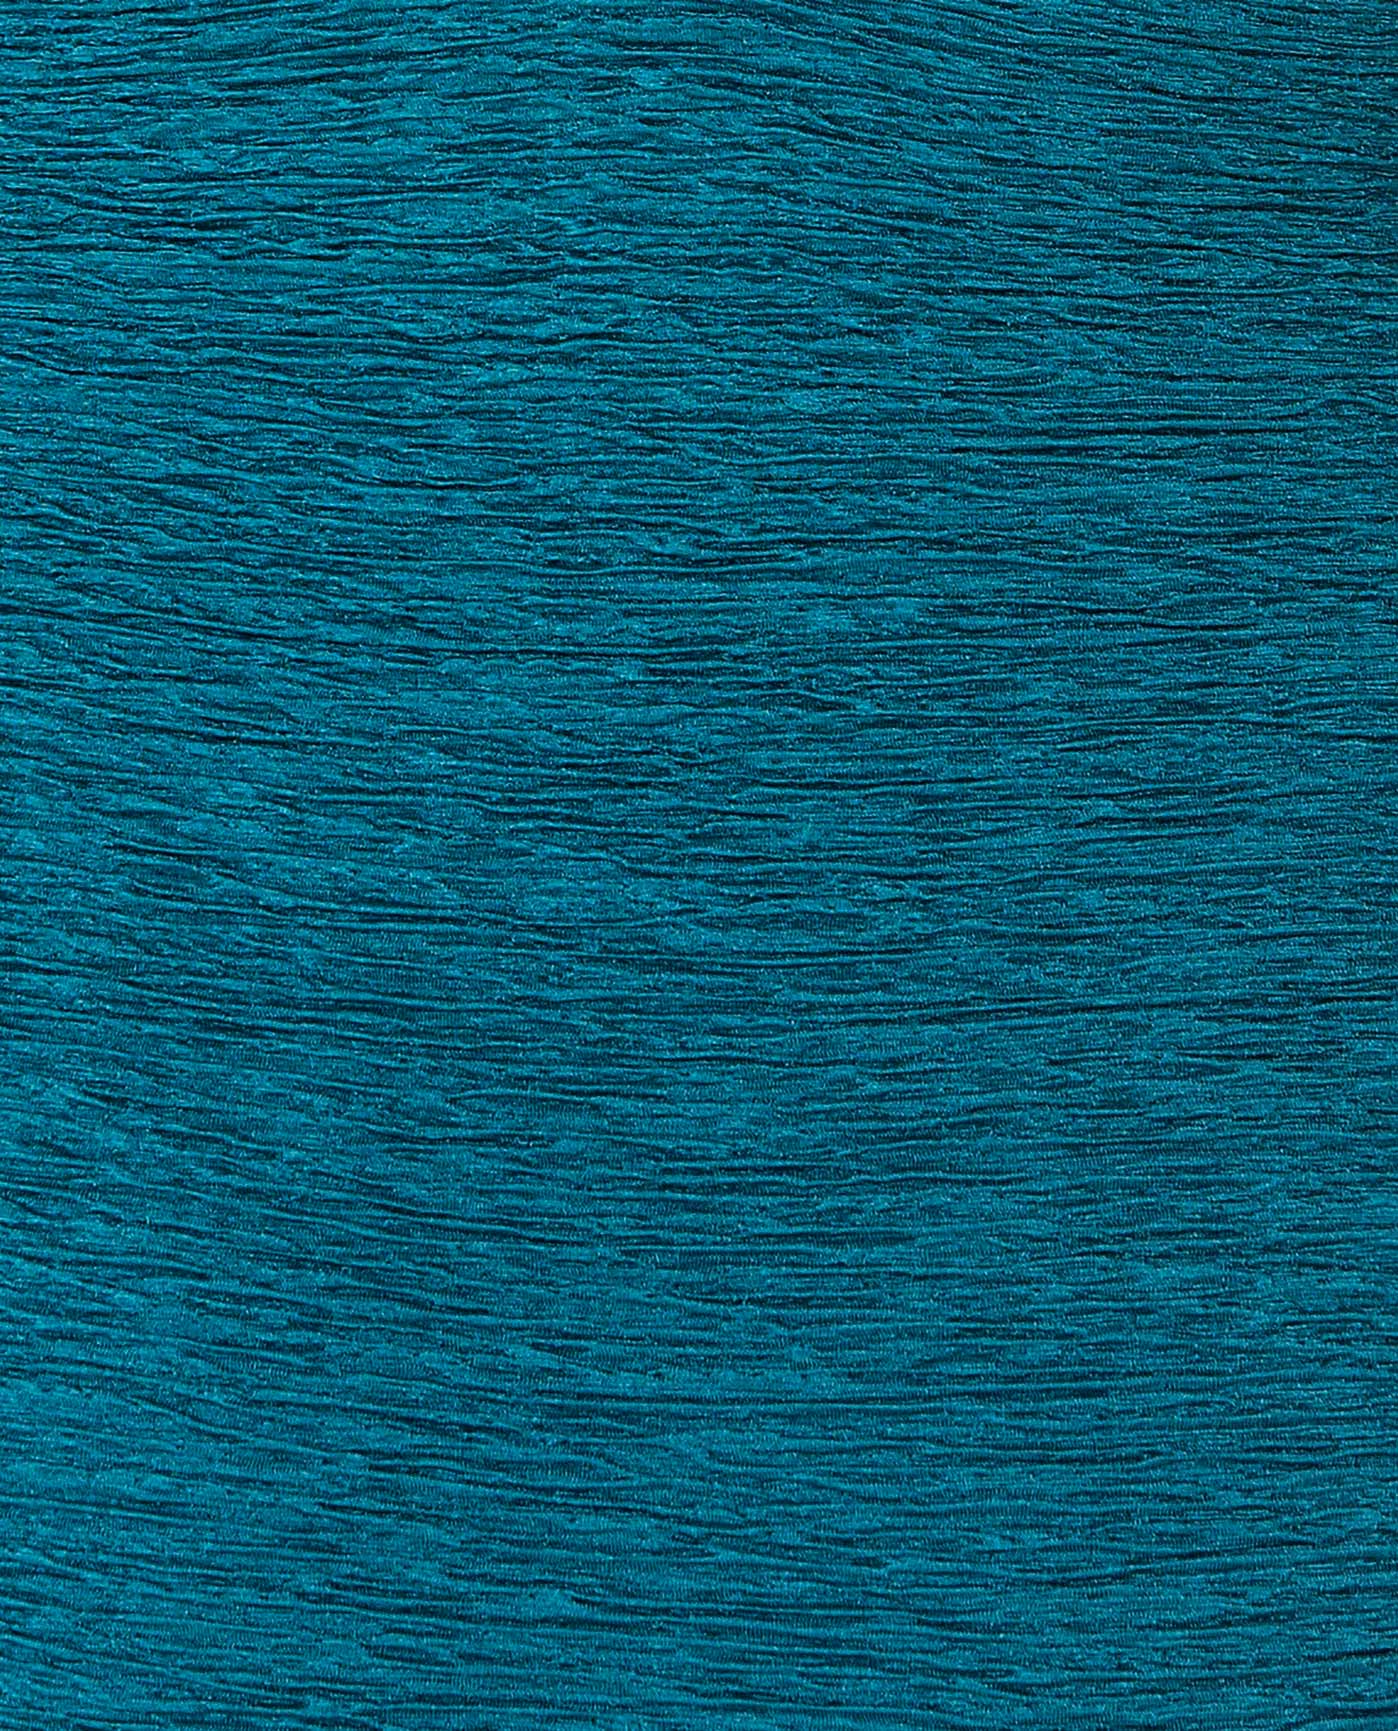 FABRIC SWATCH VIEW OF CHLORINE RESISTANT KRINKLE TEXTURED COLOR BLOCK TWIST FRONT PLUS SIZE LONG TORSO ONE PIECE | KRINKLE COSMO BLUE